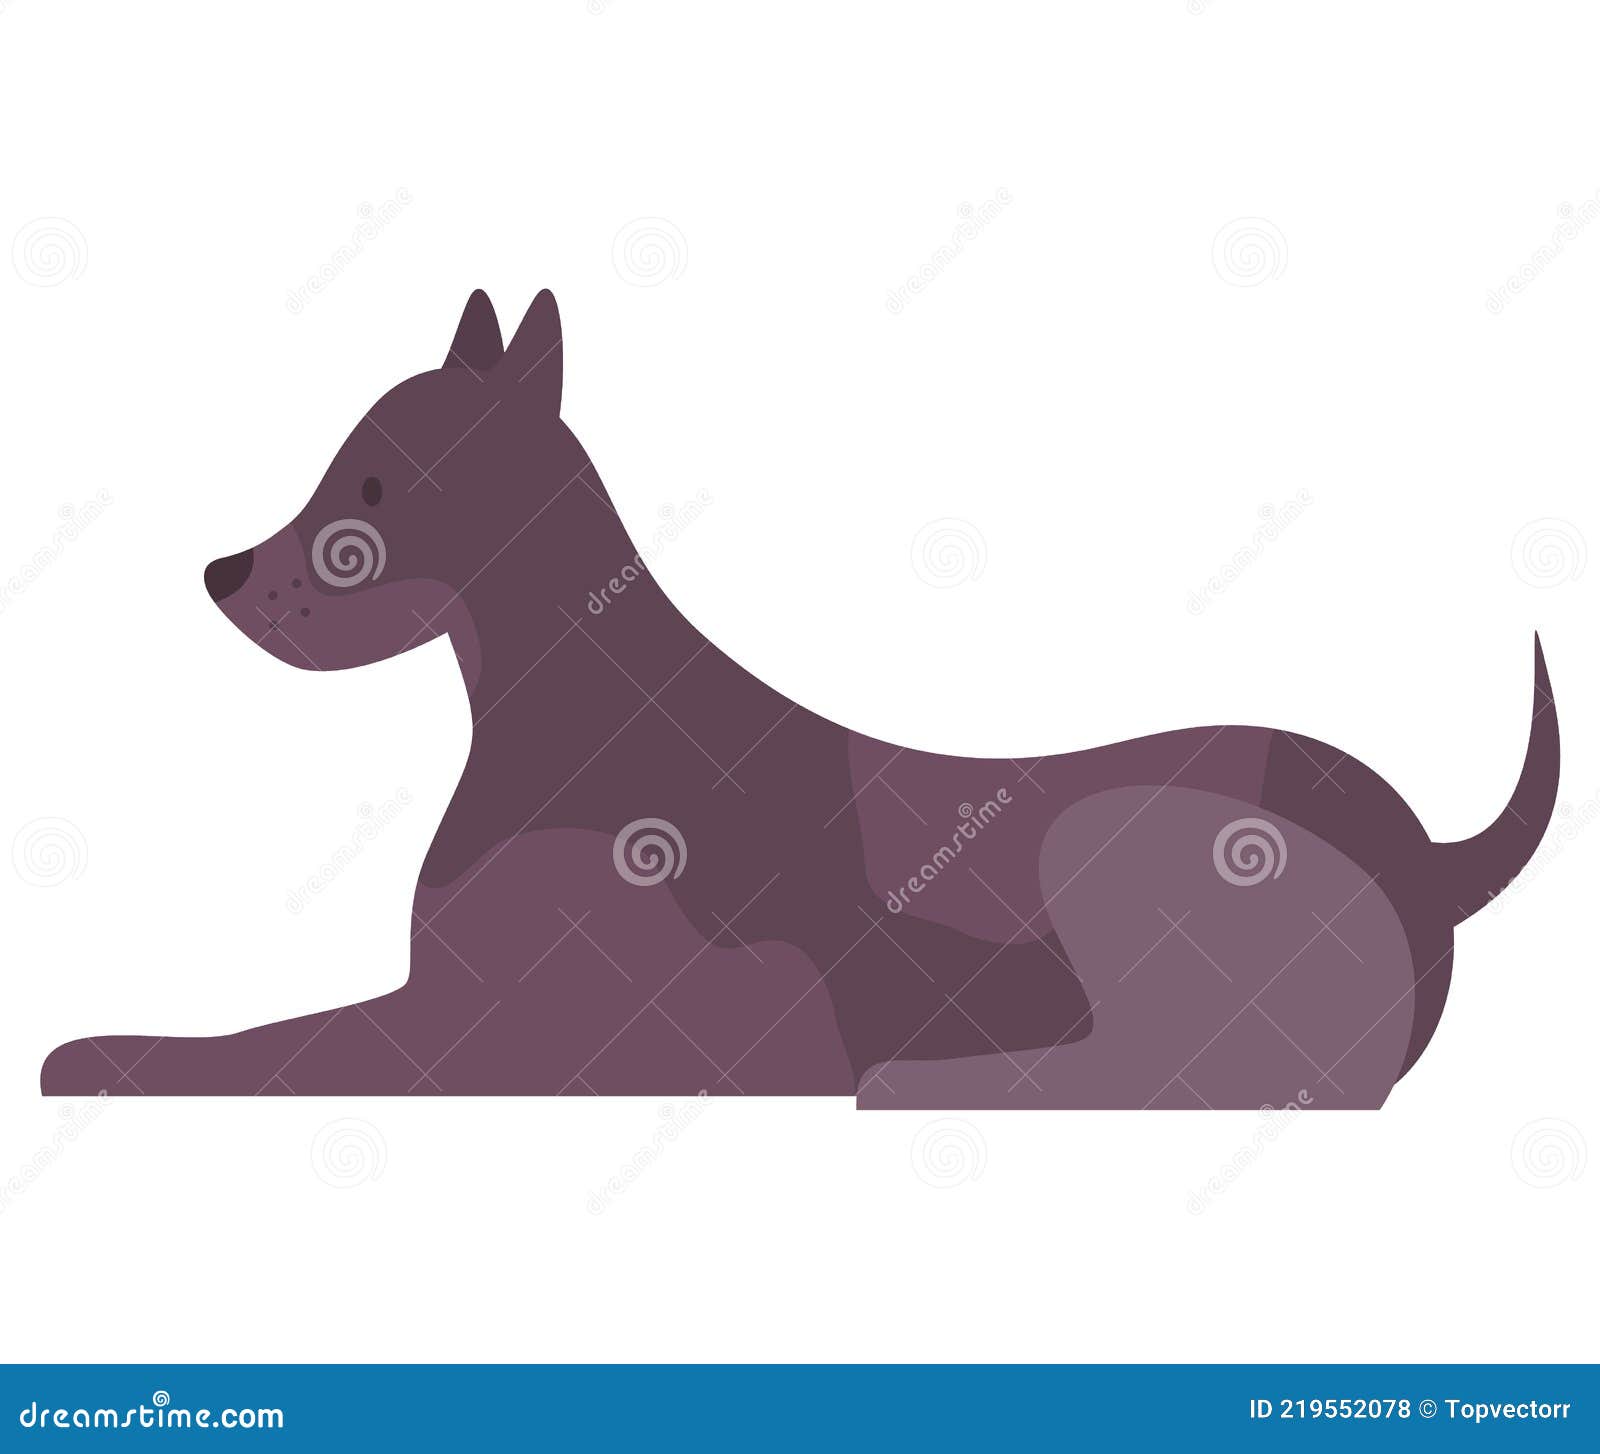 Cute Cartoon Dog with Black Fur Sitting Side View. Pet Shorthair Dark  Doggy, Domestic Animal Stock Vector - Illustration of funny, mustache:  219552078